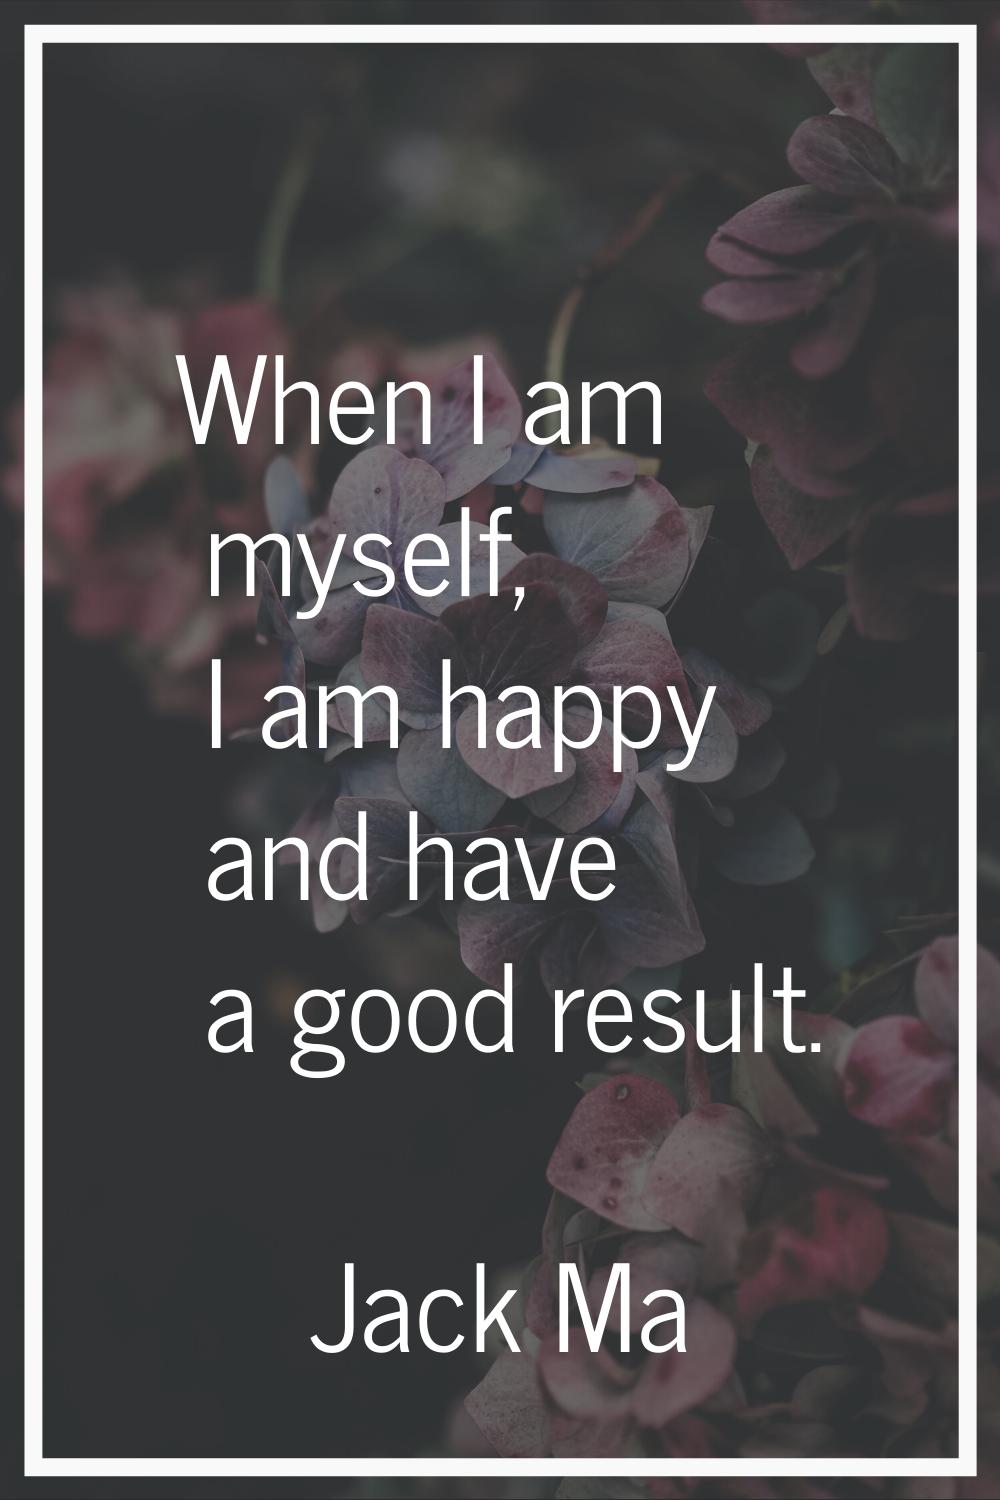 When I am myself, I am happy and have a good result.